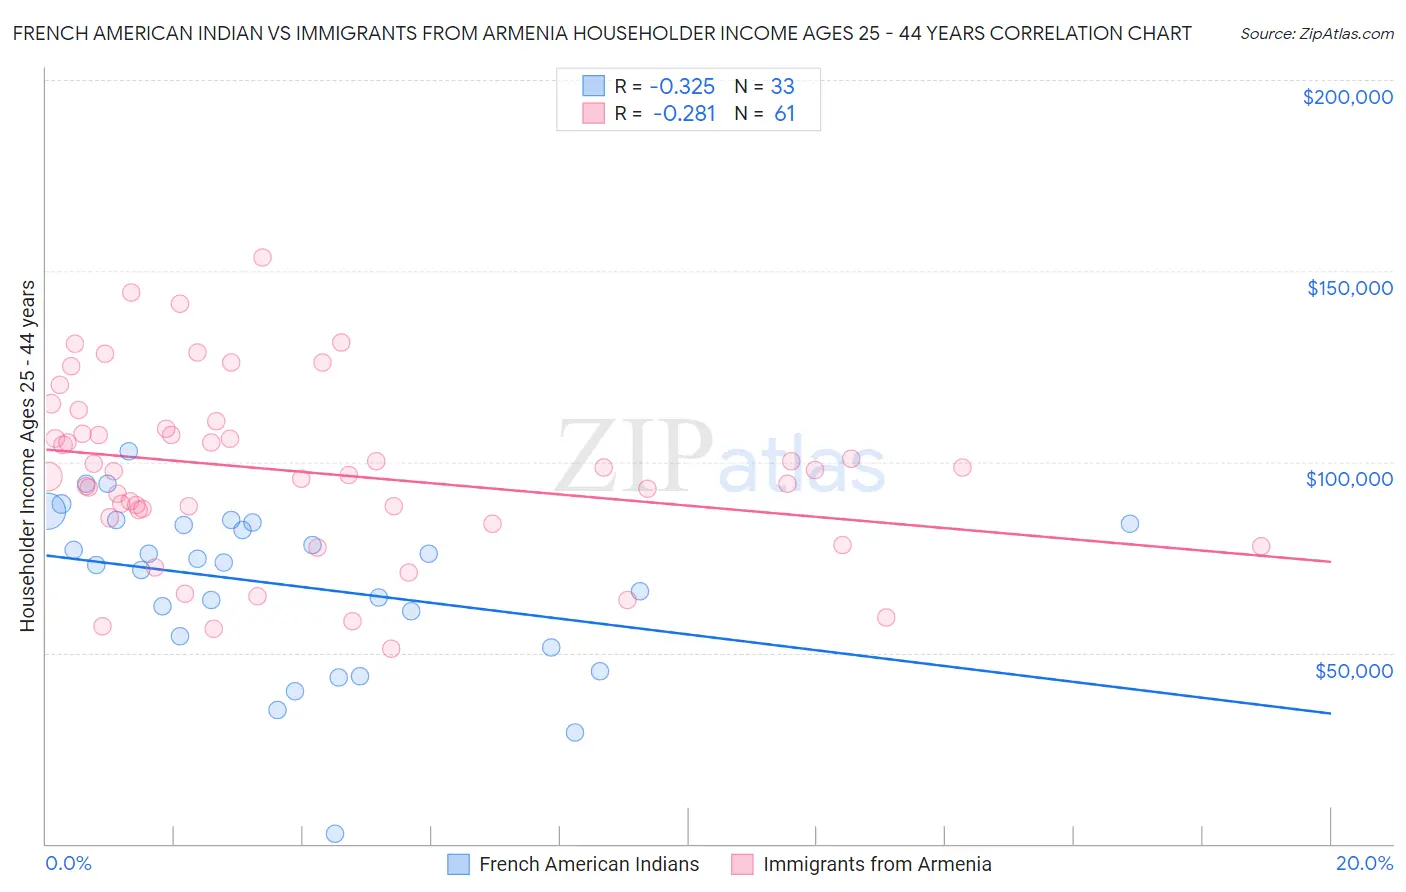 French American Indian vs Immigrants from Armenia Householder Income Ages 25 - 44 years